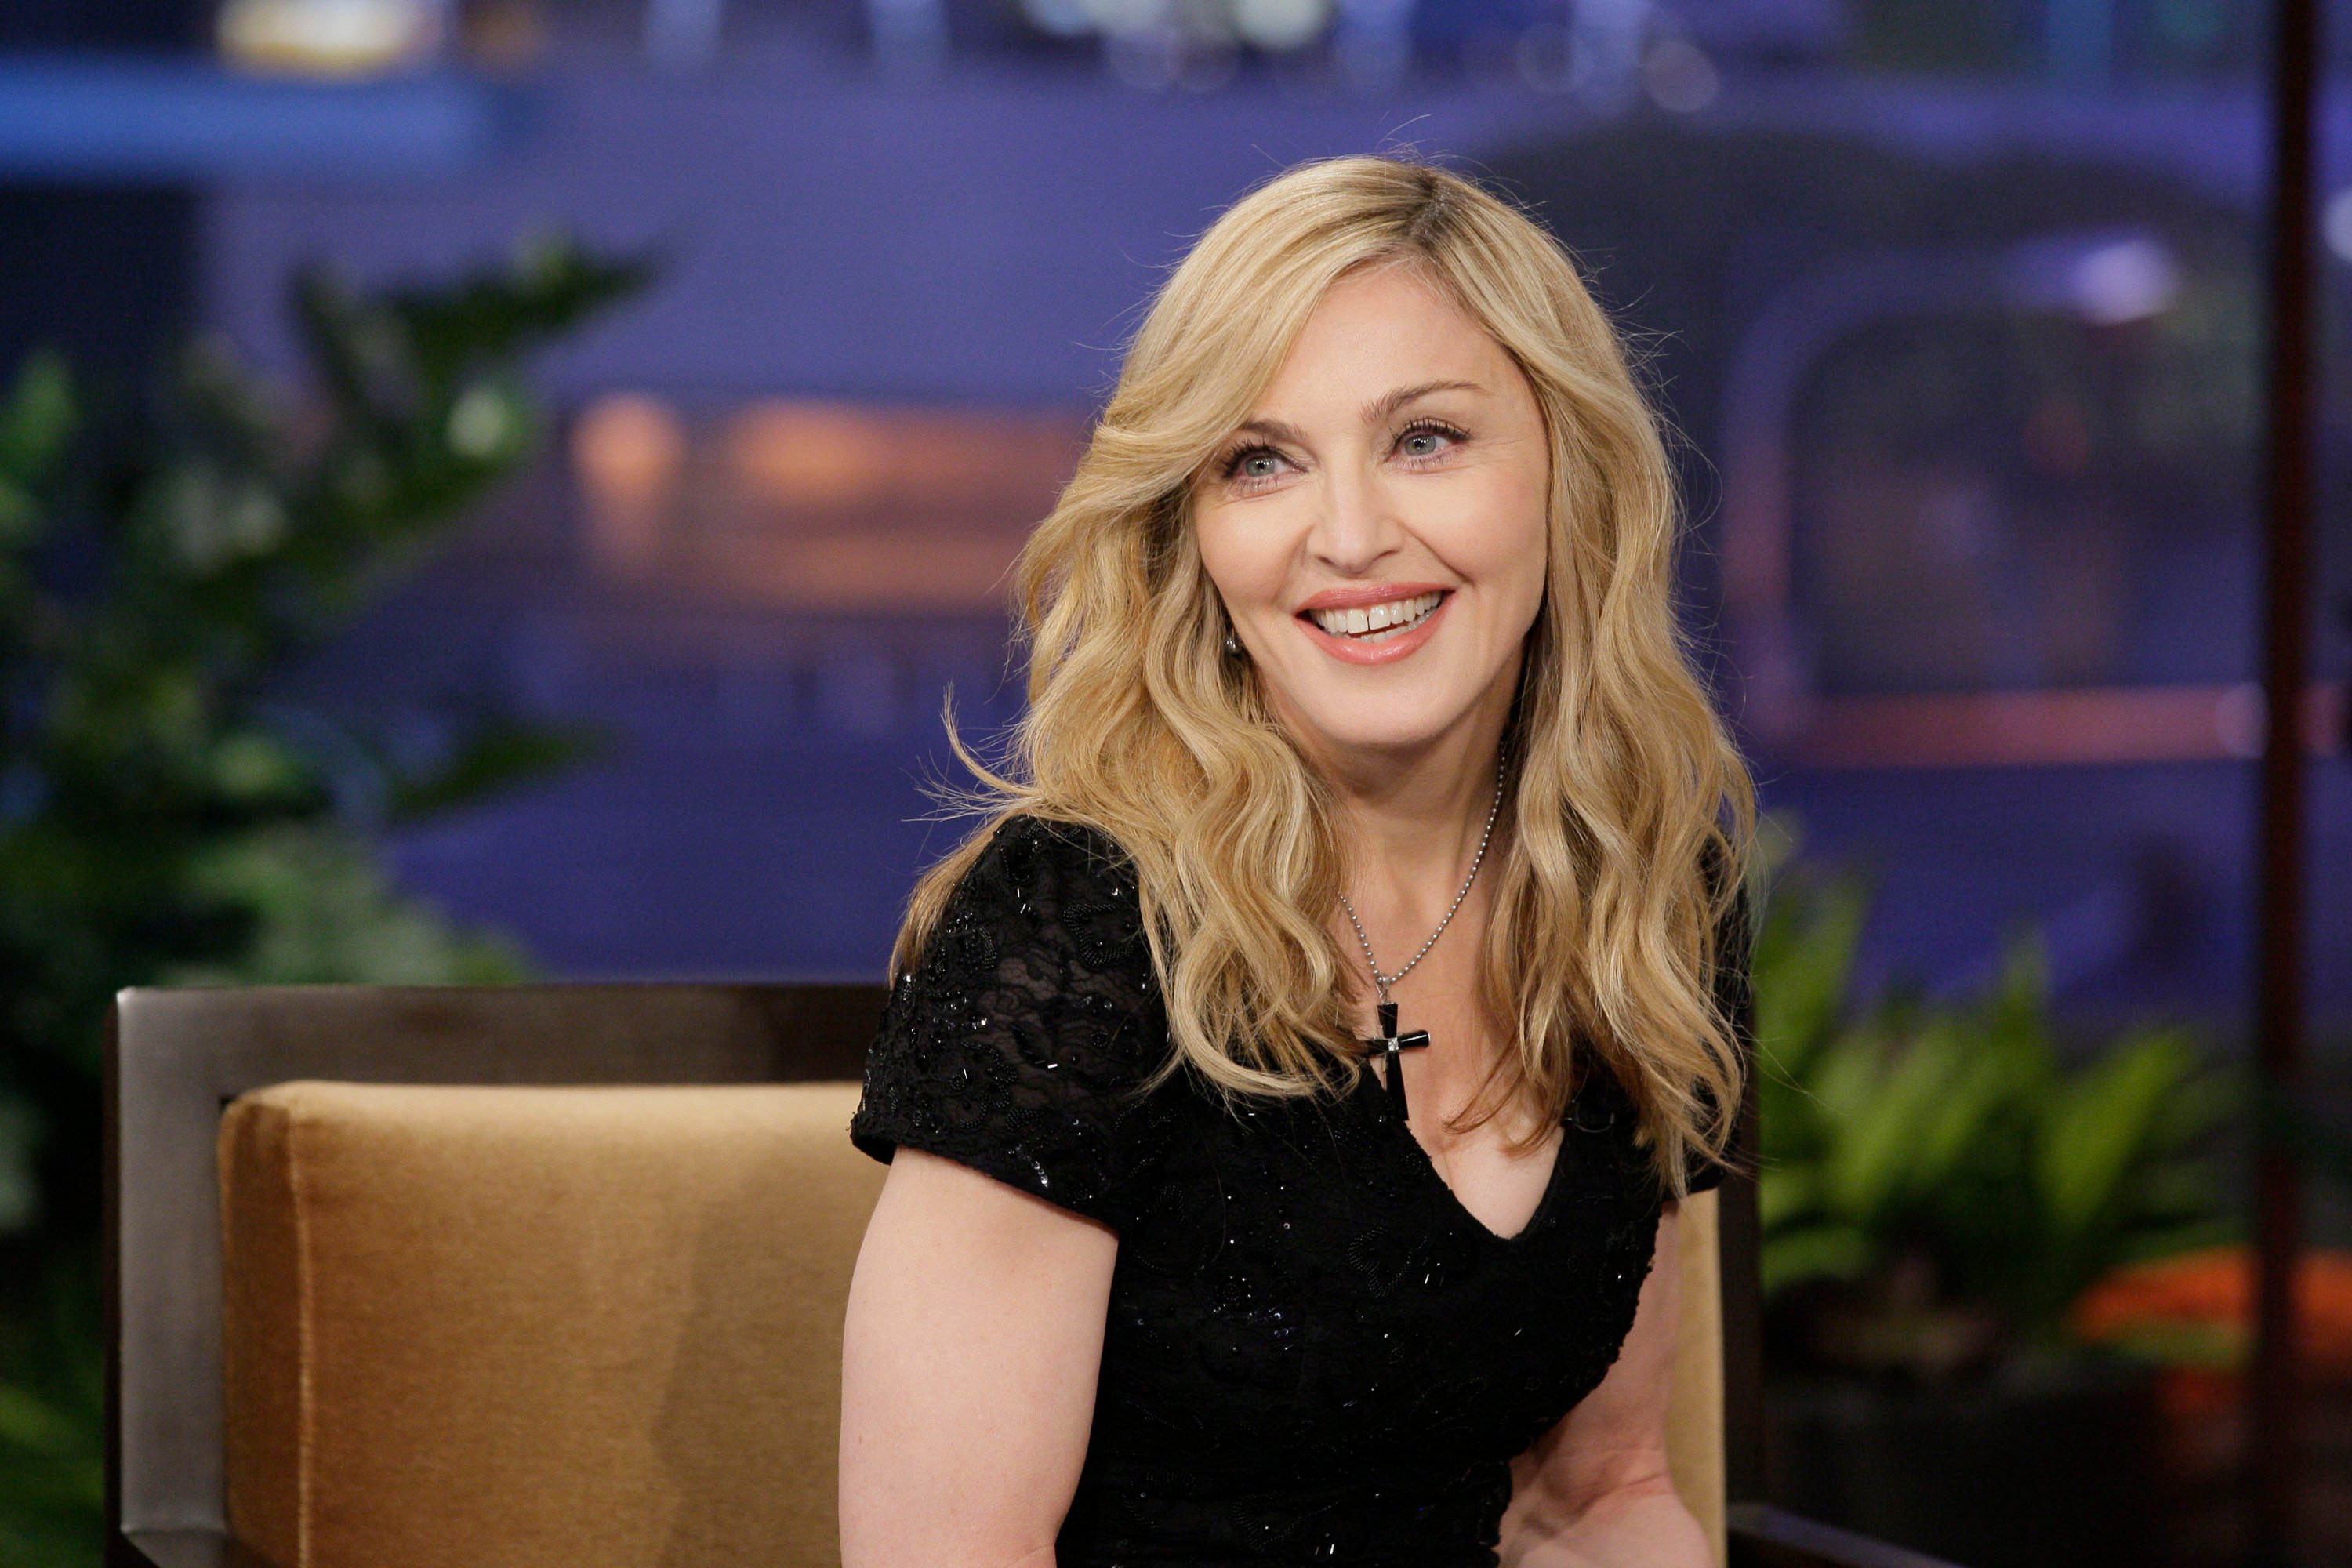 Madonna wears a black shirt and black cross necklace. She sits in a chair.